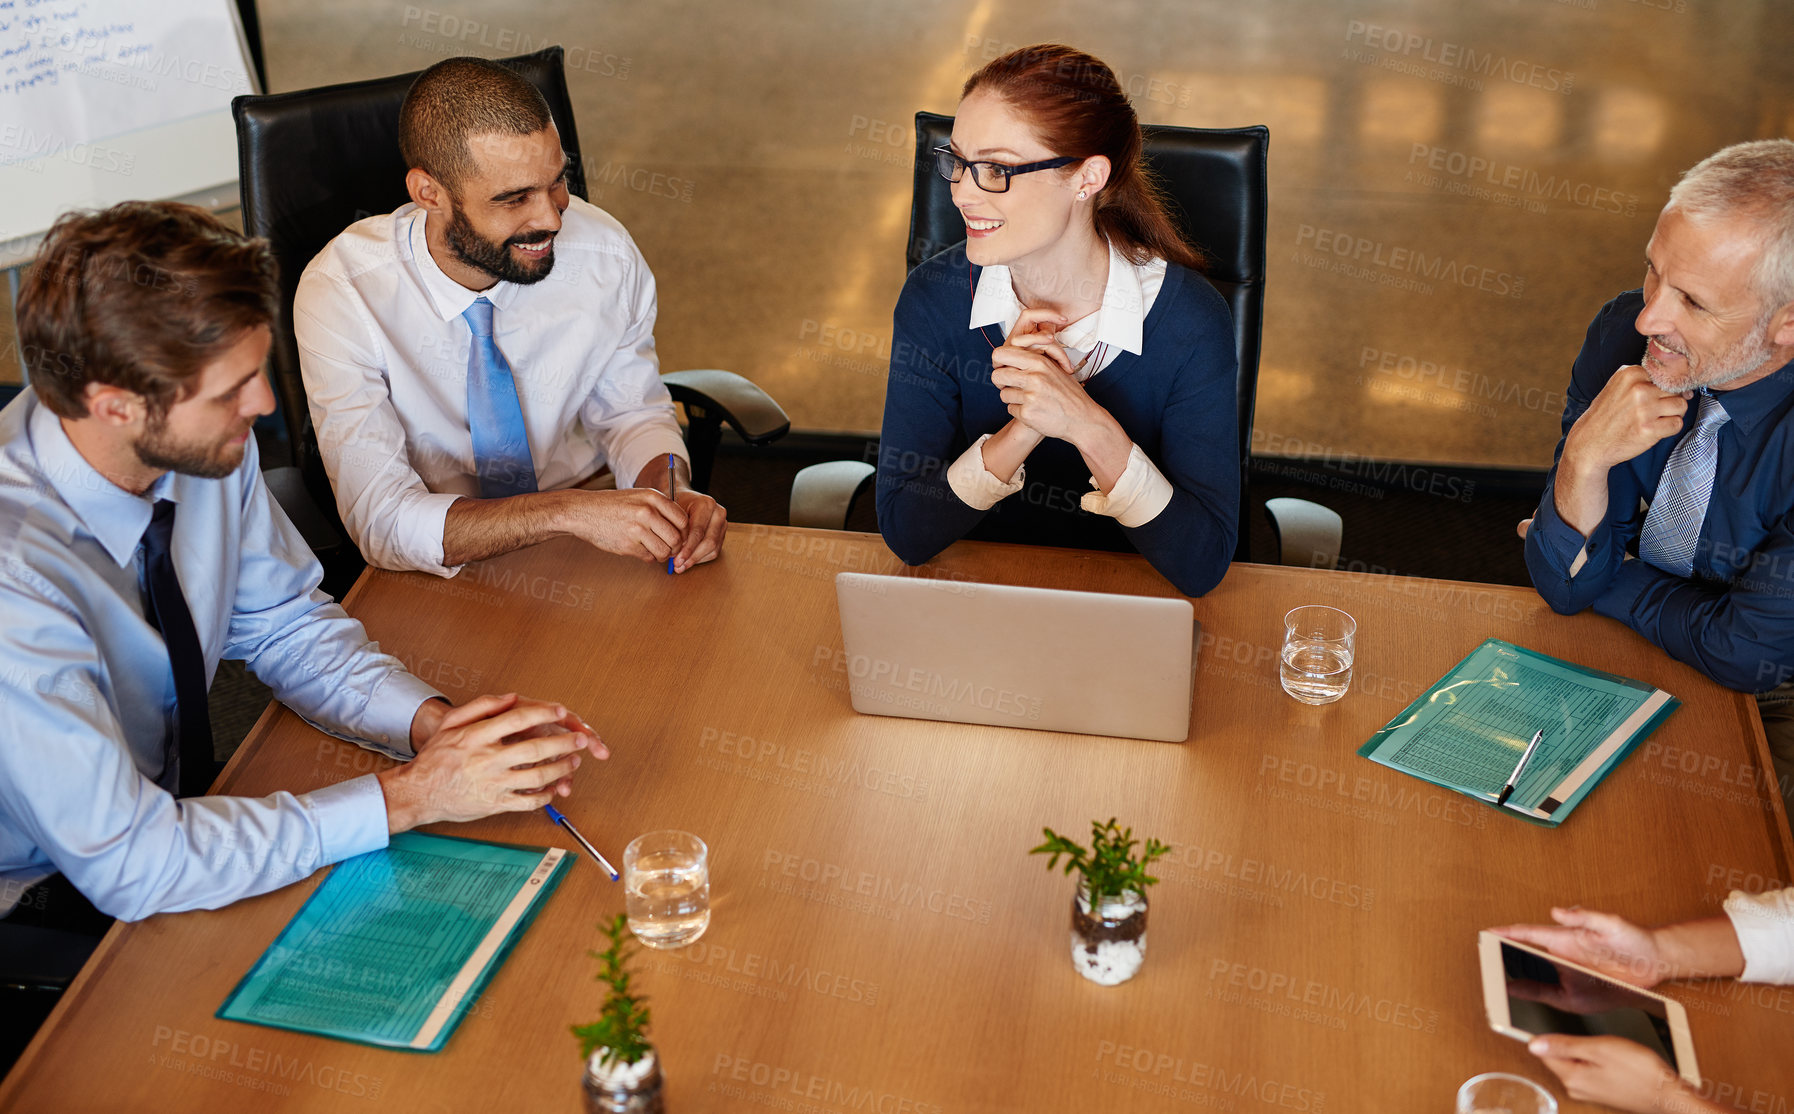 Buy stock photo Shot of a group of businesspeople having a boardroom meeting